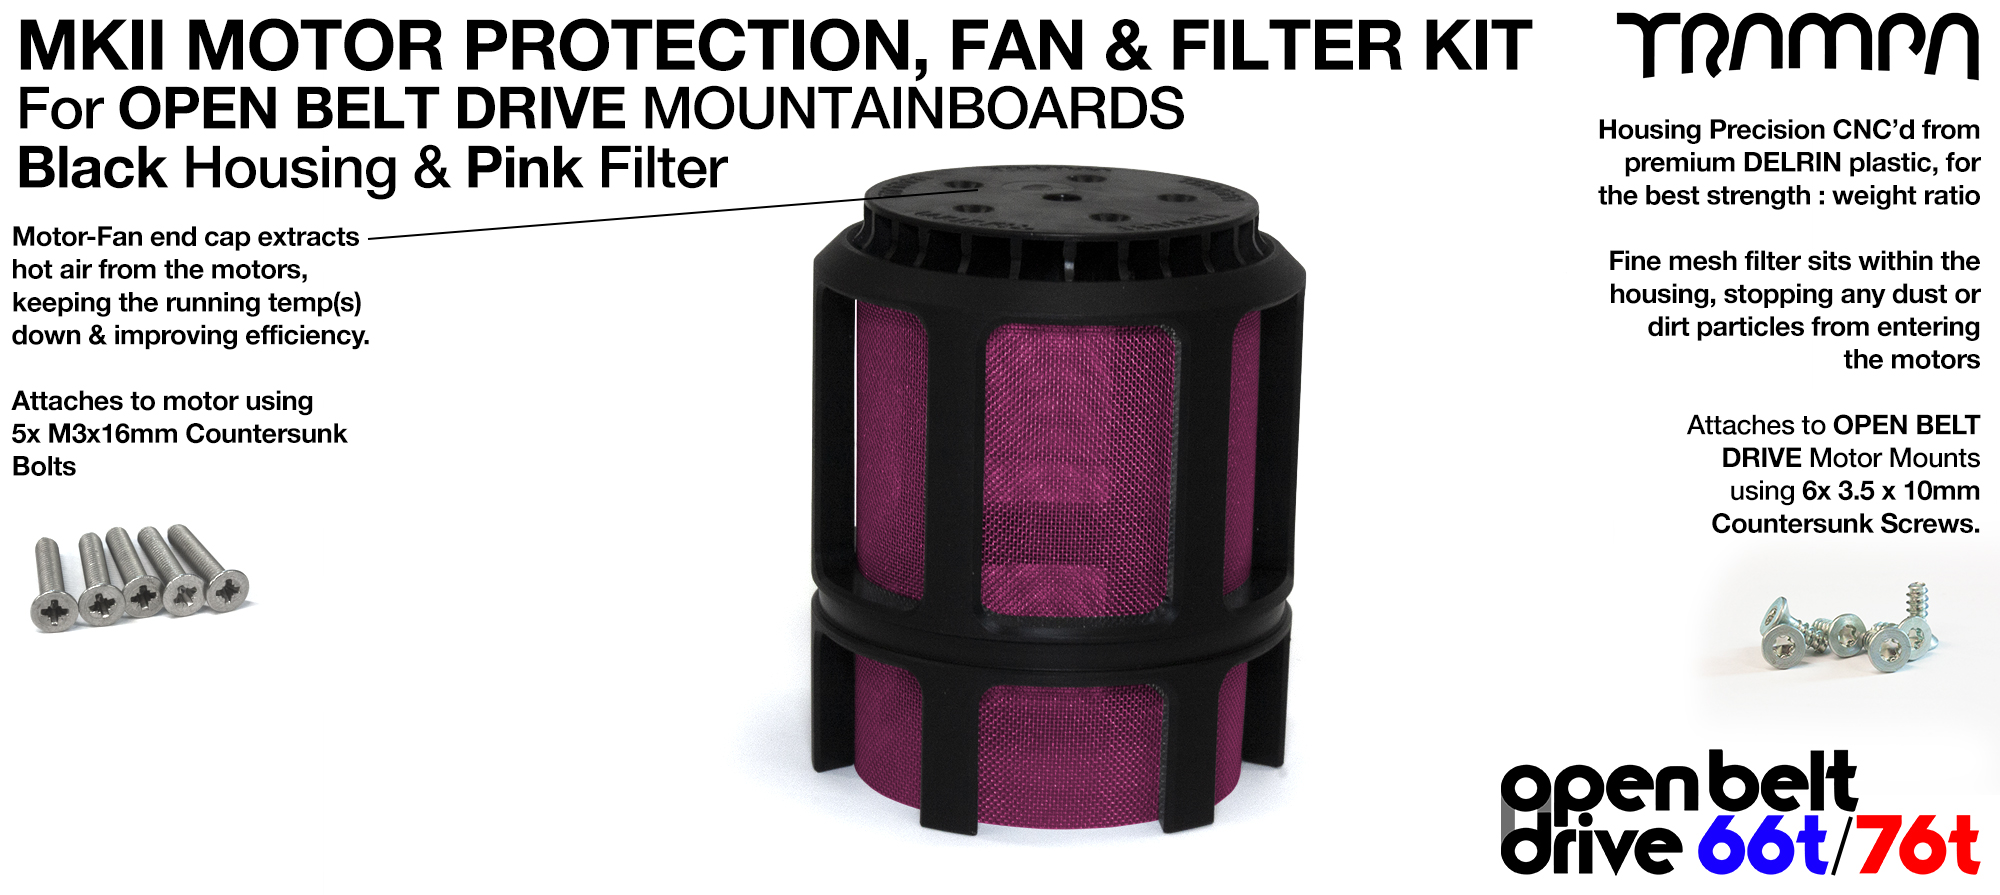 1x OBD MKII Motor protection Sleeve with PINK Filter